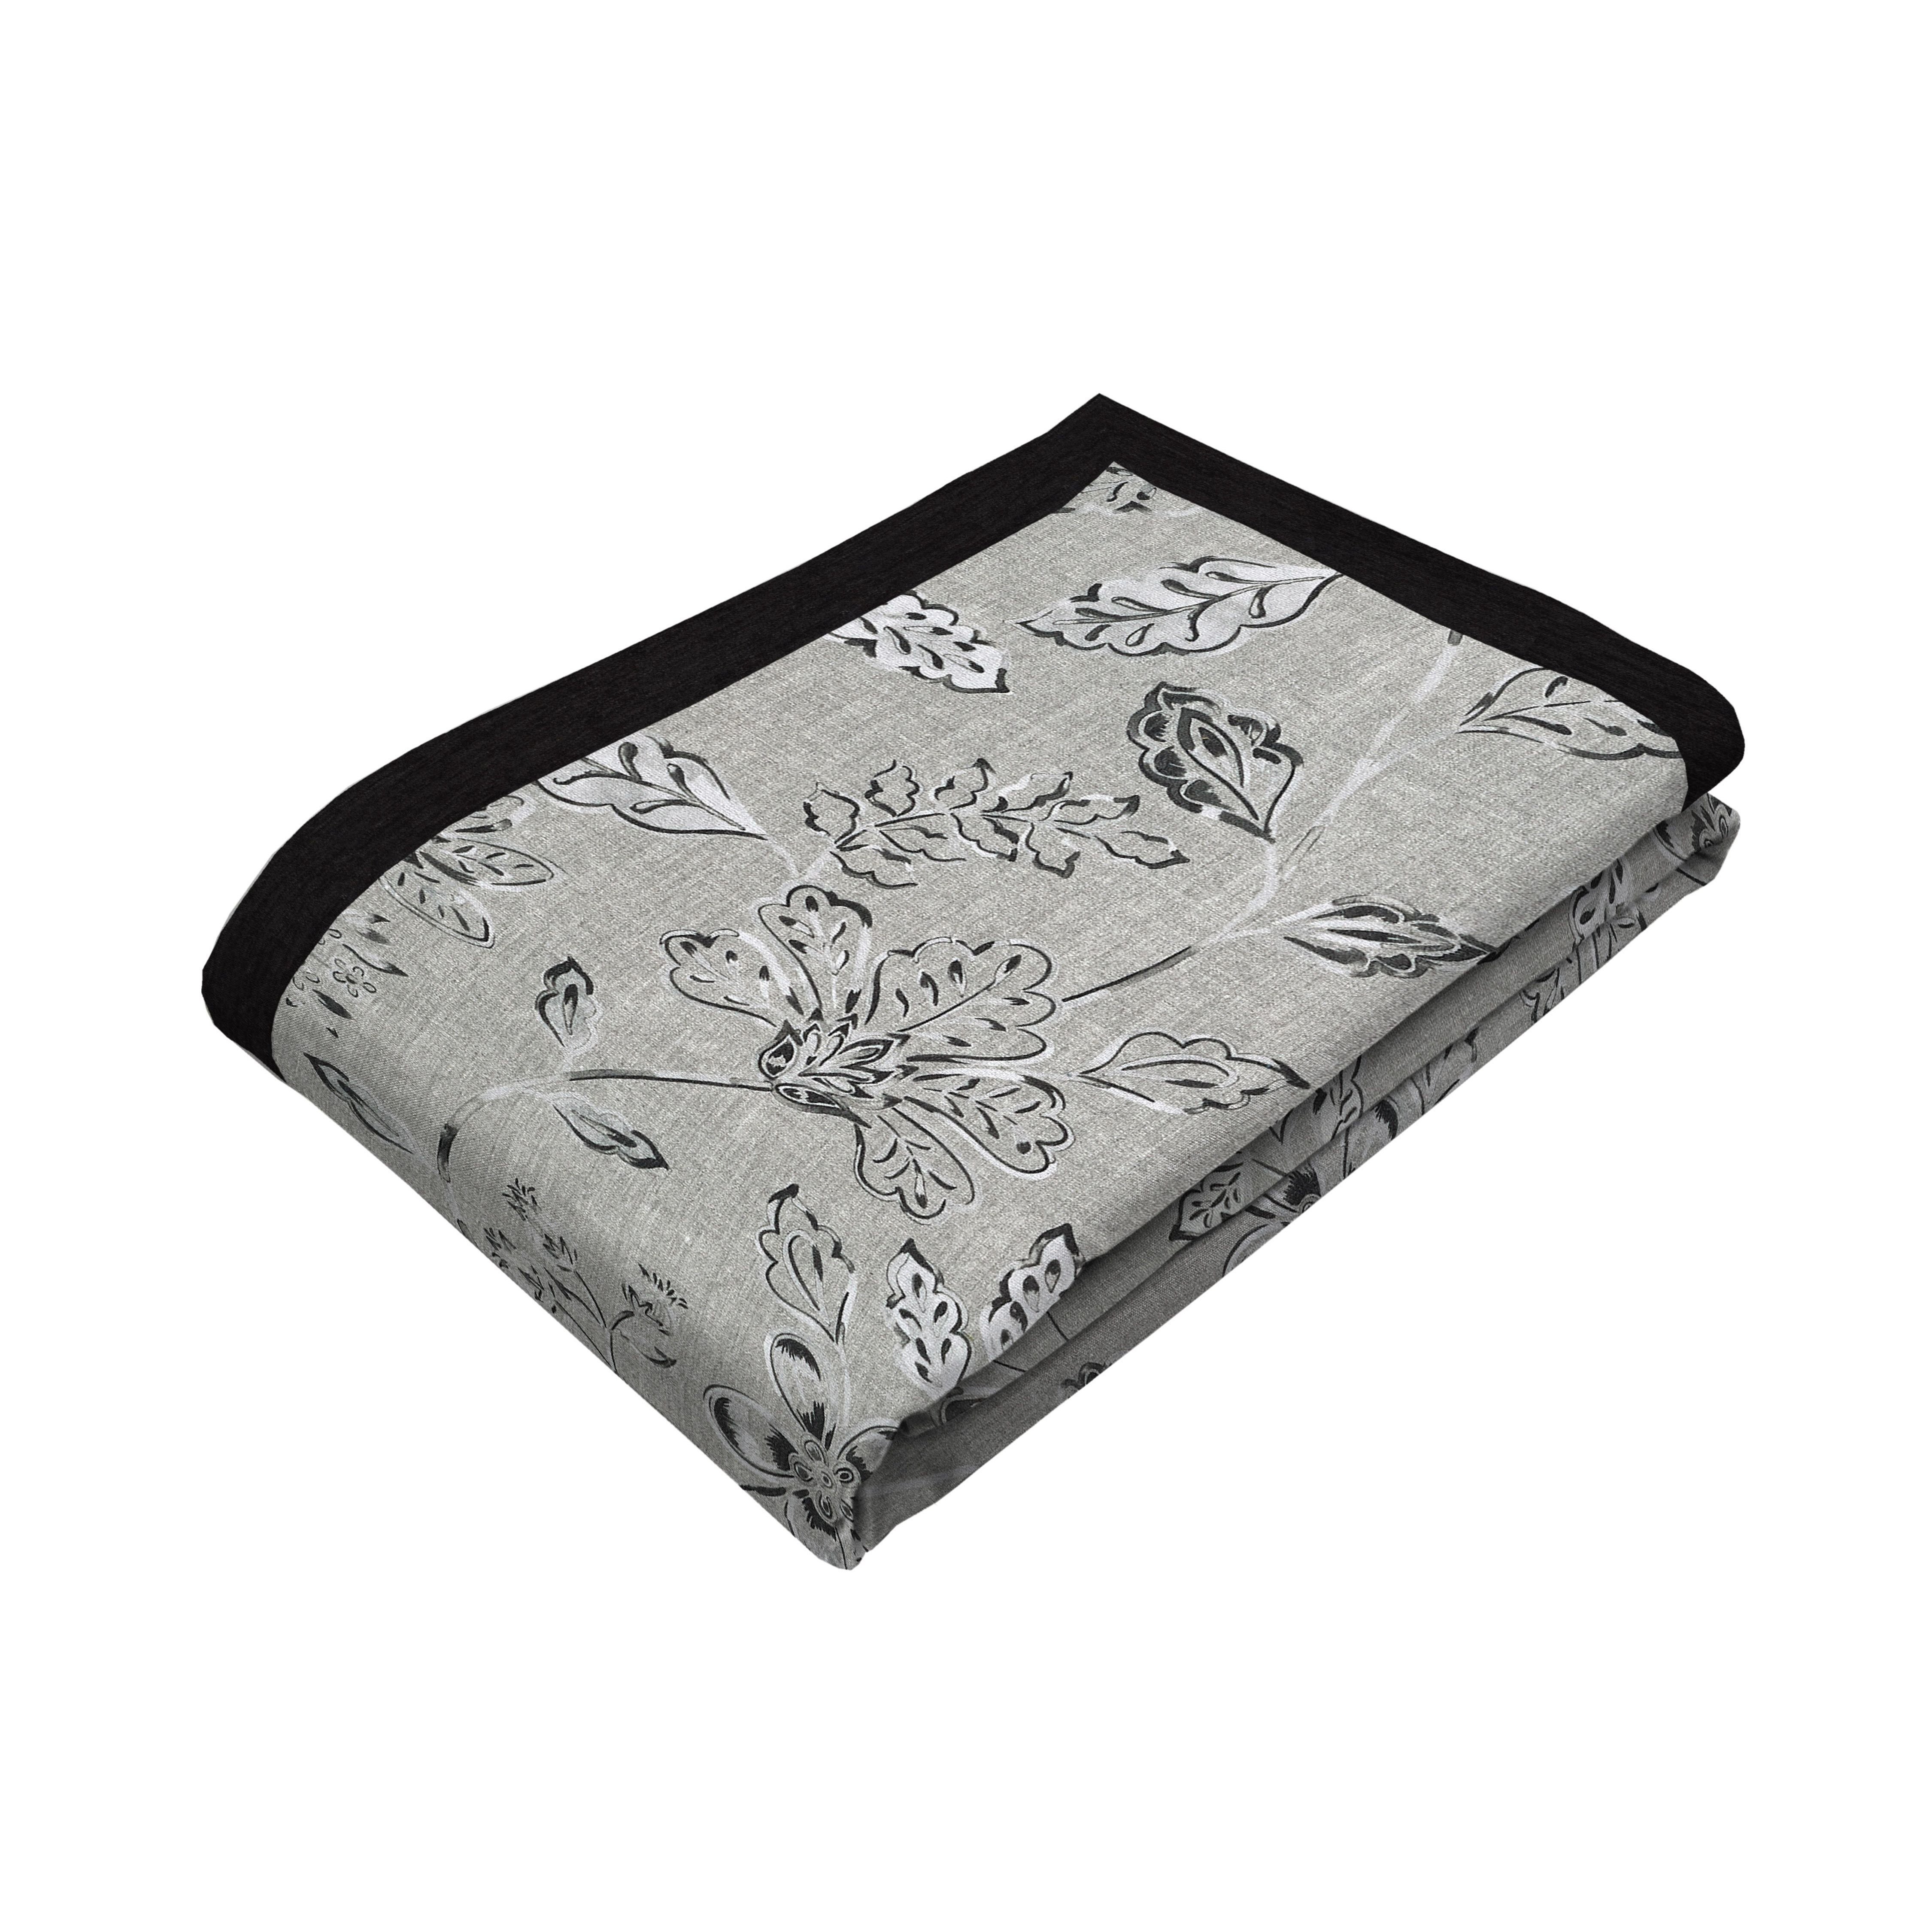 Eden Charcoal Grey Printed Throws and Runners, Bed Runner (50cm x 255cm)